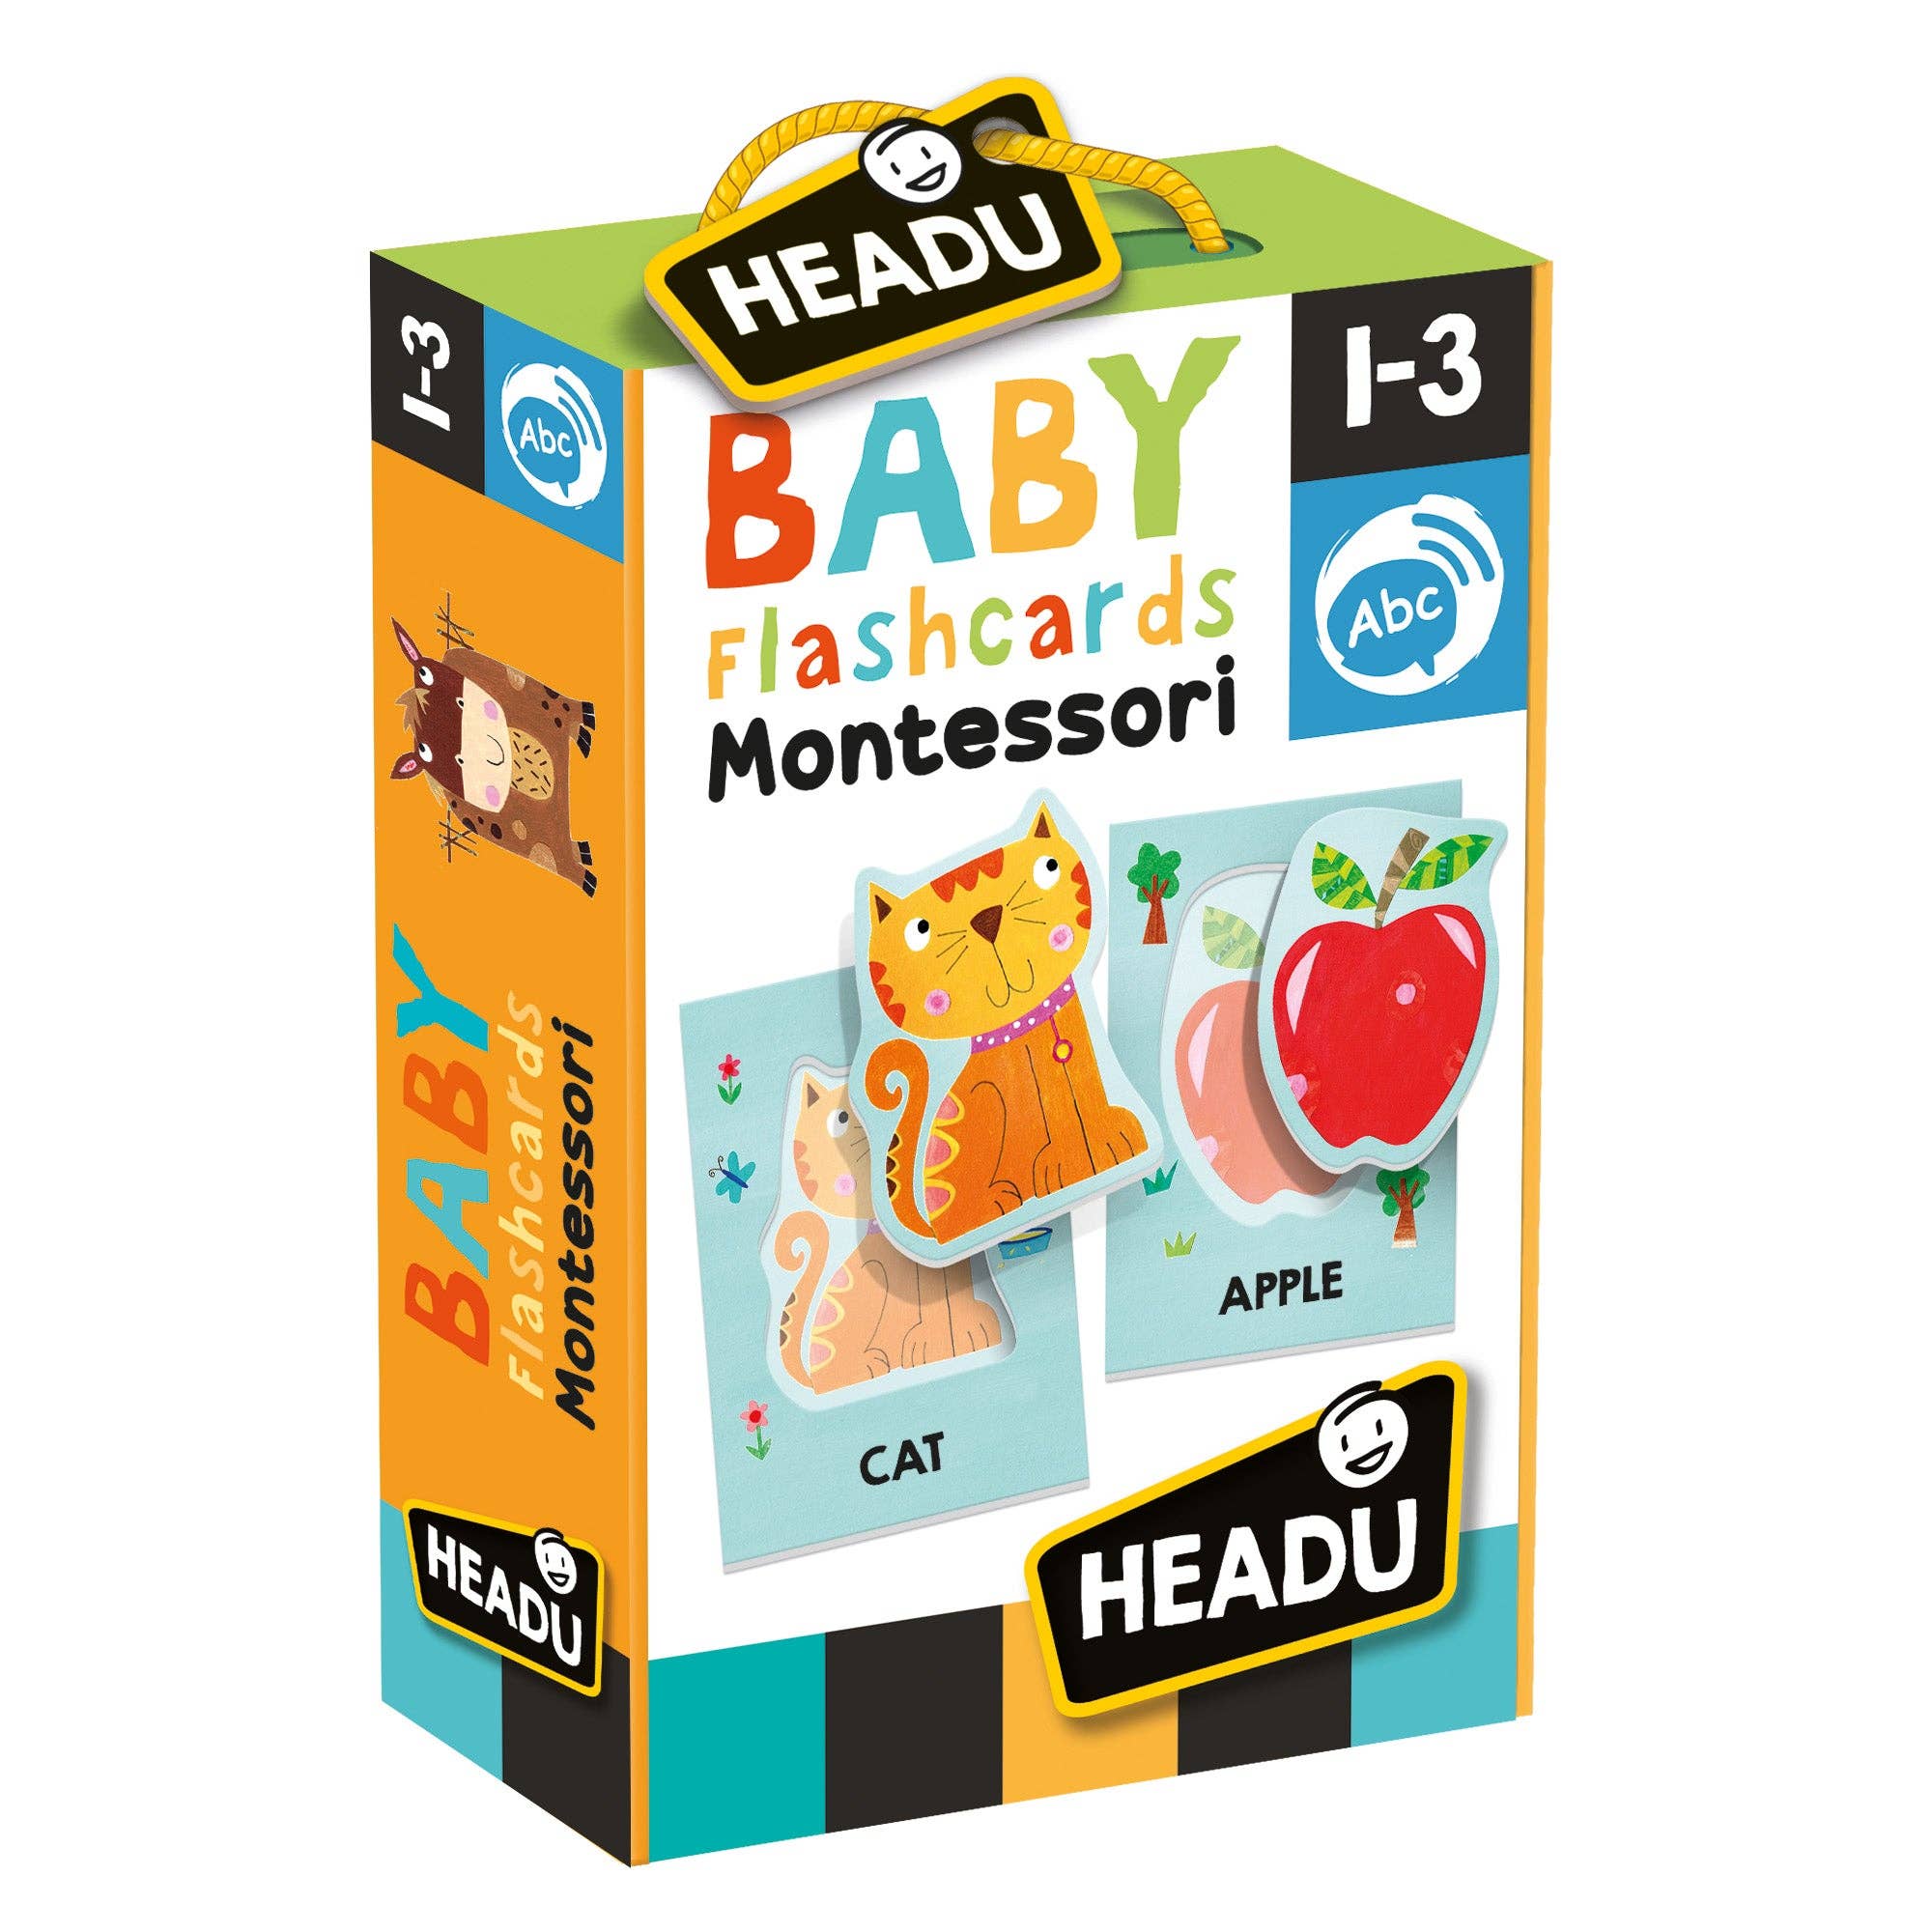 Educational Flash Cards for Young Children Based on Montessori School Learning Method for Ksmtoys by Headu: Cardboard / Large / Primary